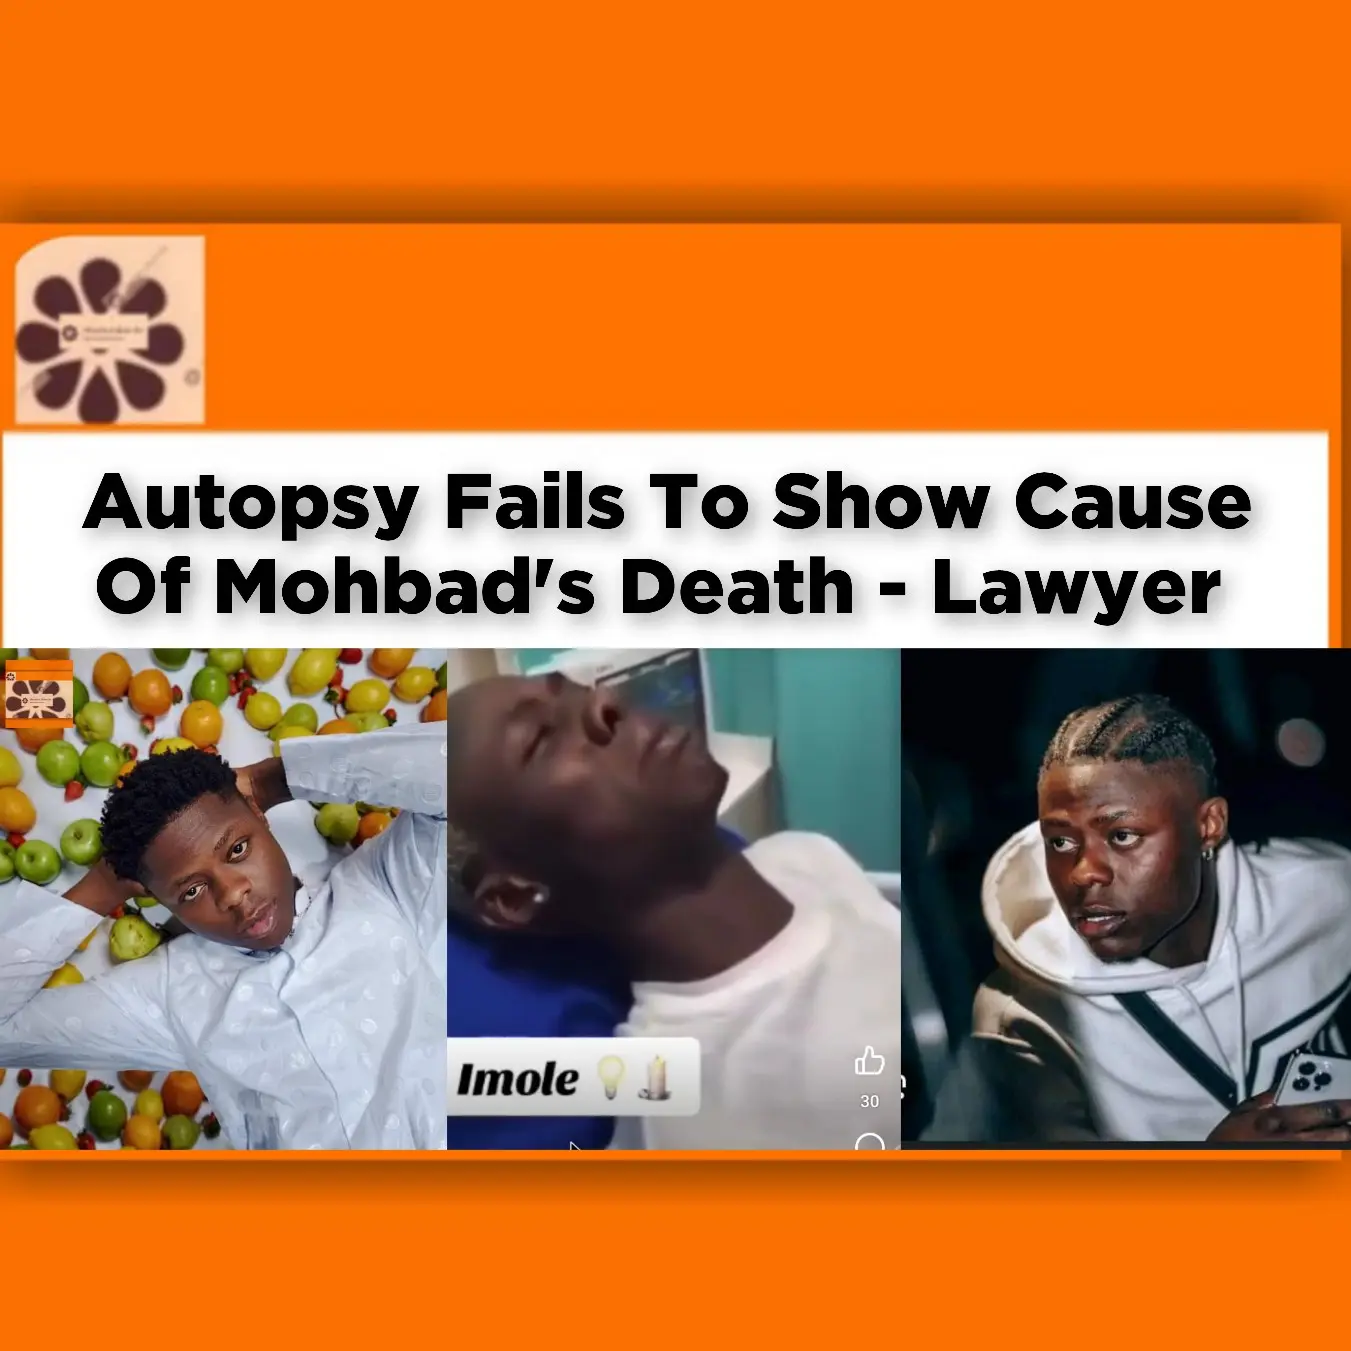 Autopsy Fails To Show Cause Of Mohbad's Death - Lawyer ~ OsazuwaAkonedo #Shell